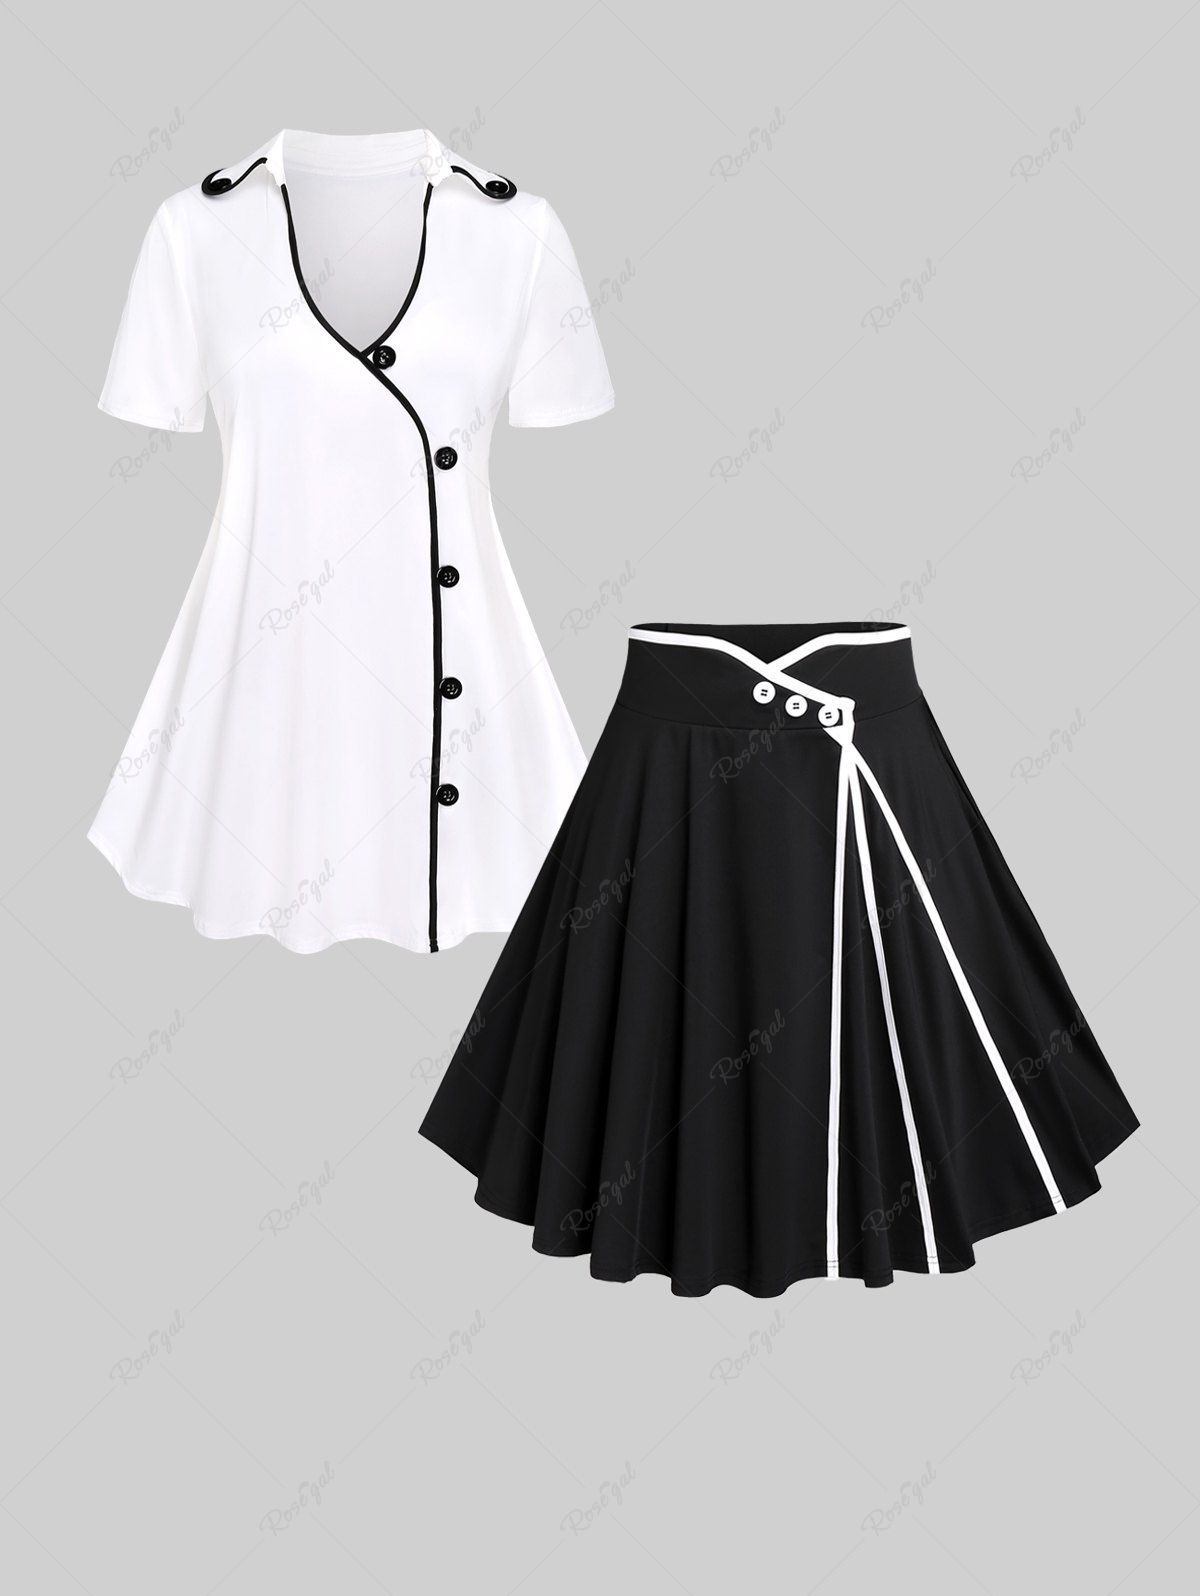 Unique Monochrome Binding Trim Buttons Top and Keen Length Skirt Plus Size Summer Outfit  